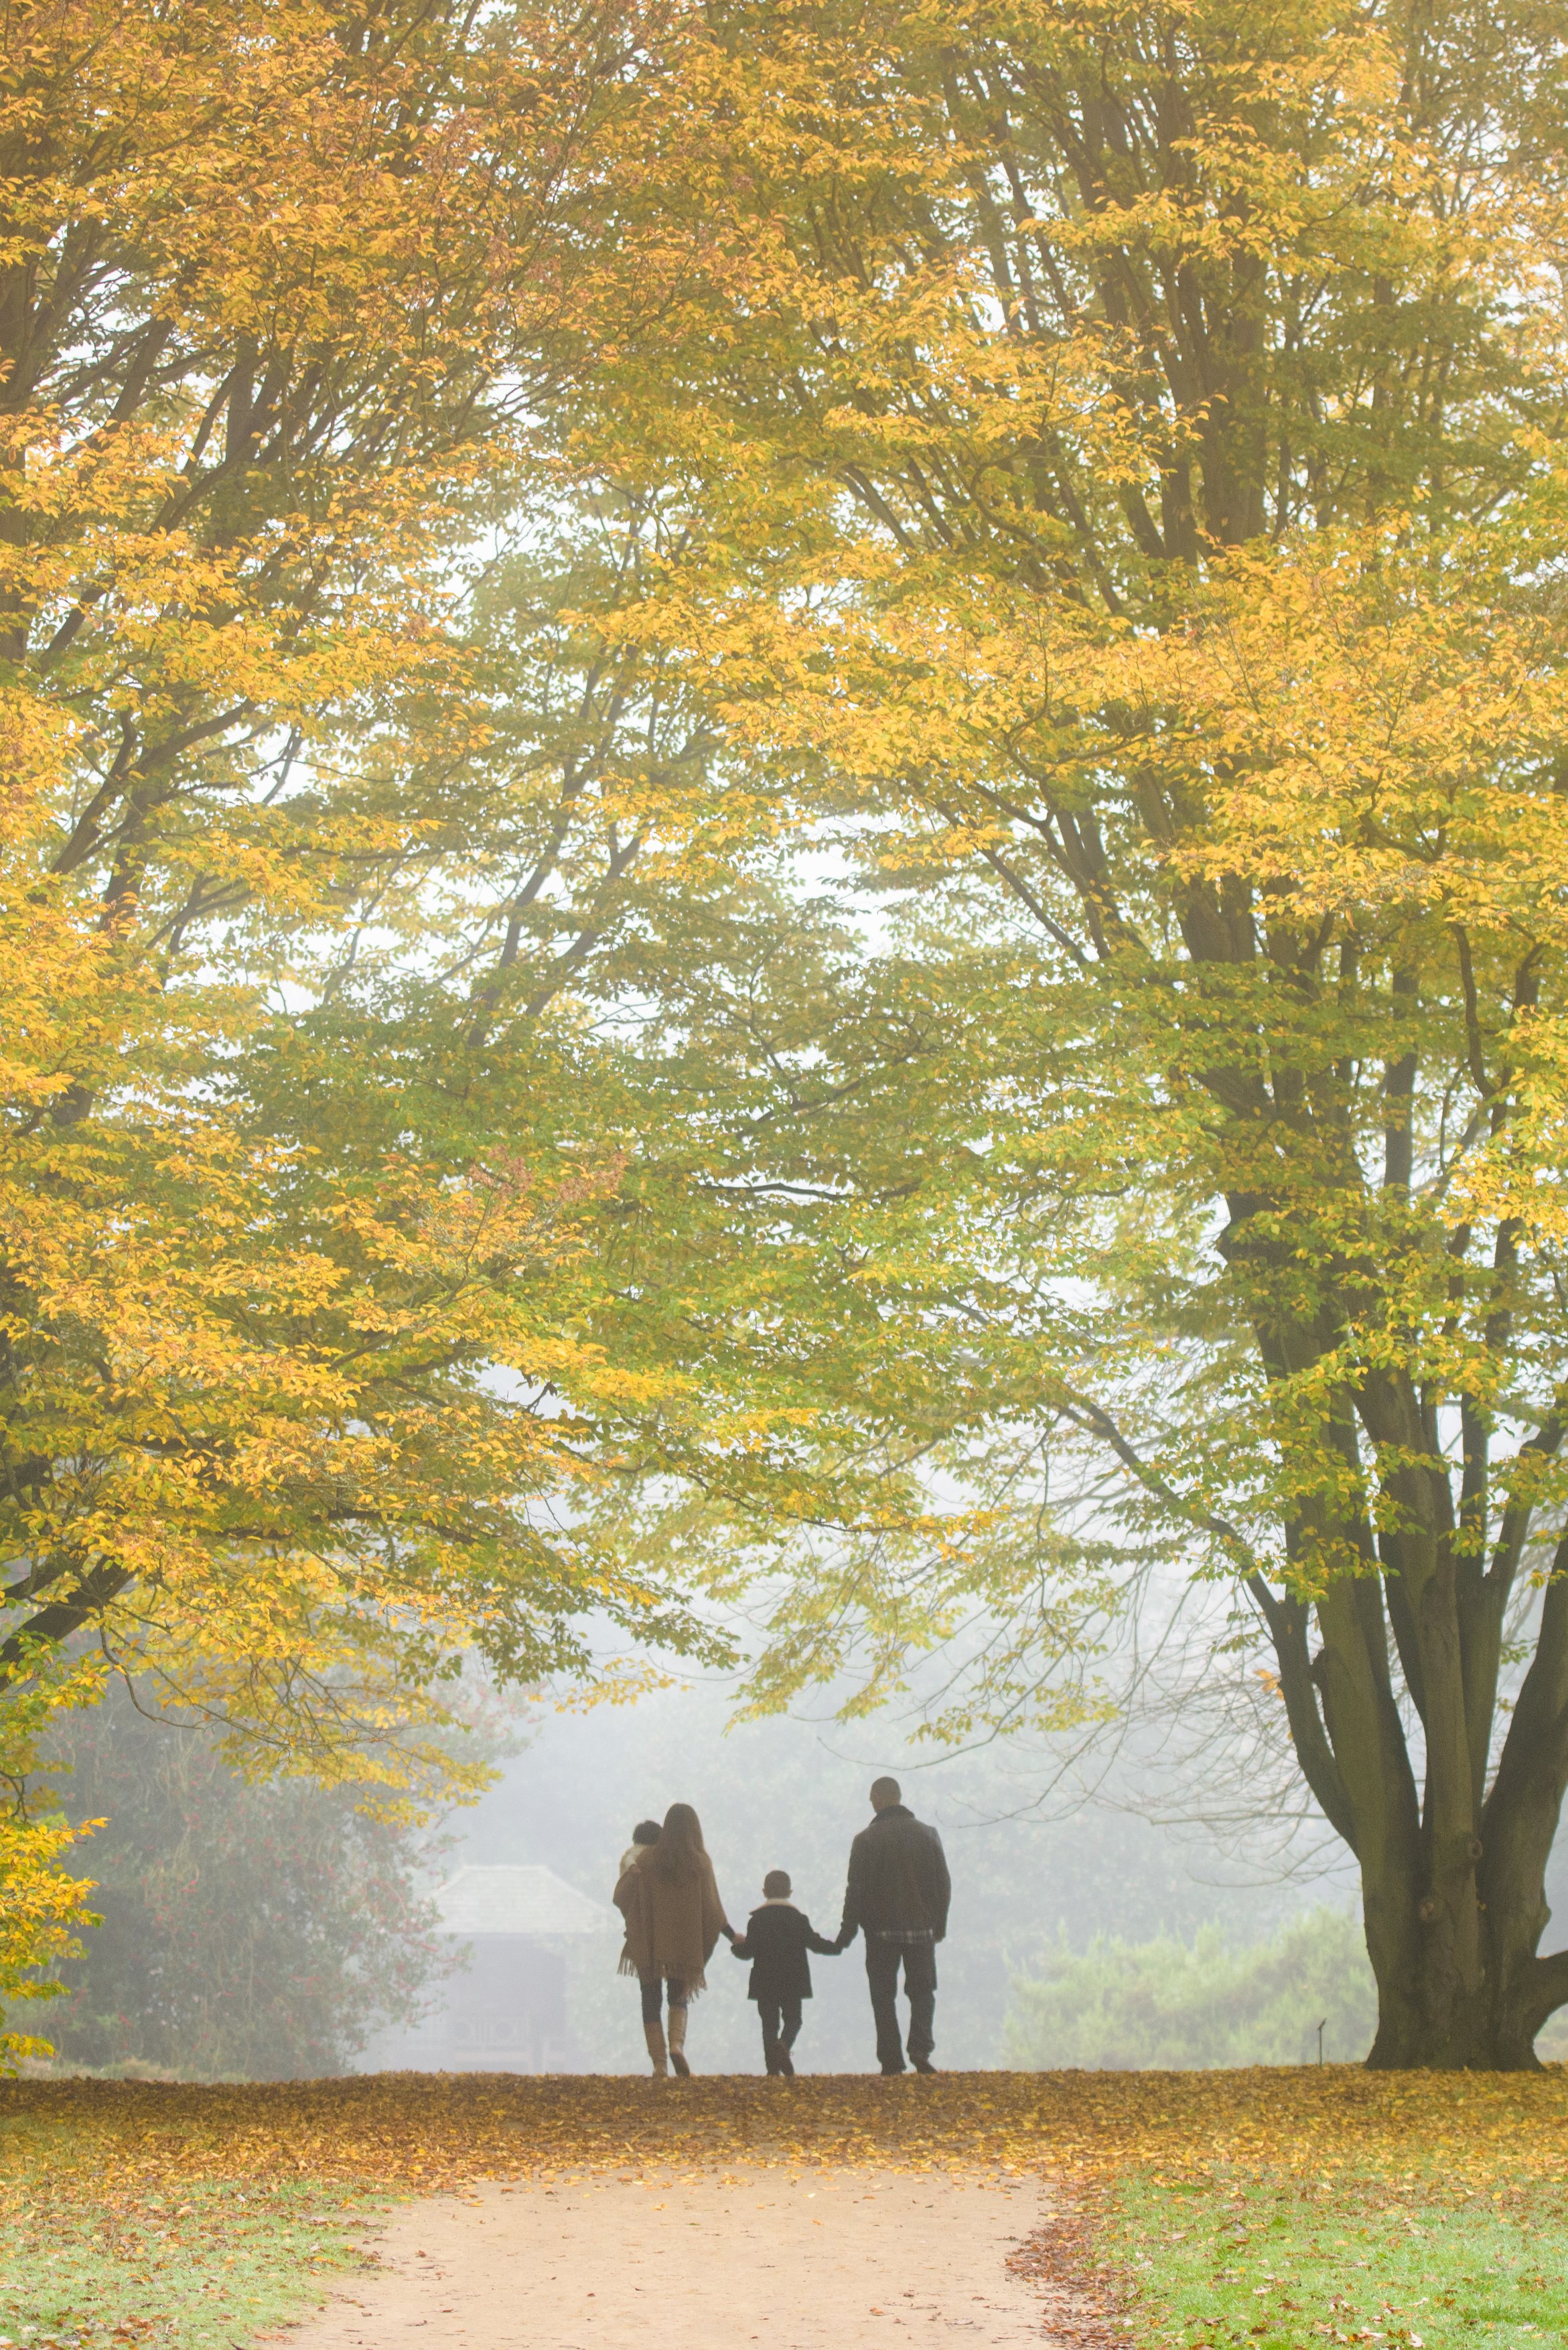 A family walks past trees in autumn colour in the Pinetum at RHS Garden Wisley (Georgi Mabee/RHS/PA)